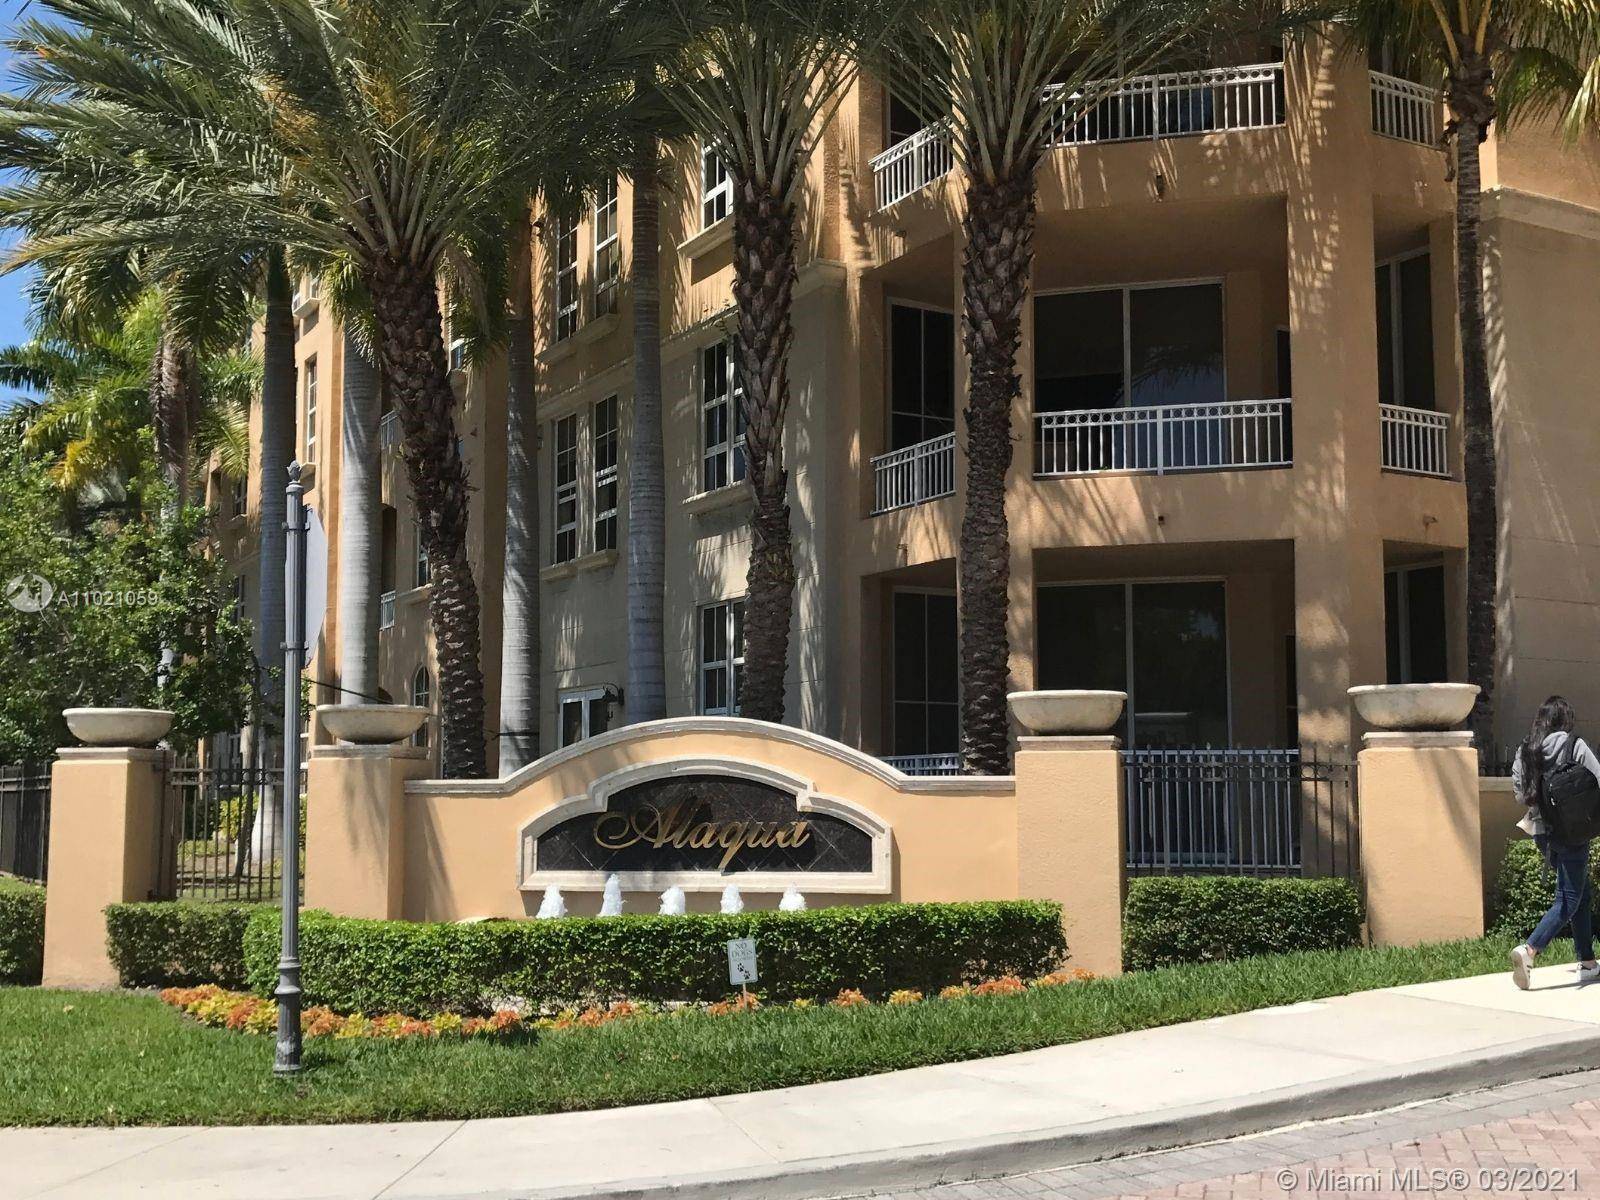 Comfortable 1 bed 1 bath apartment plus terrace located in the attractive Aventura area in the Mediterranean style Alaqua Condominio surrounding of lovely landscaped courtyards and near of the retailers, ...